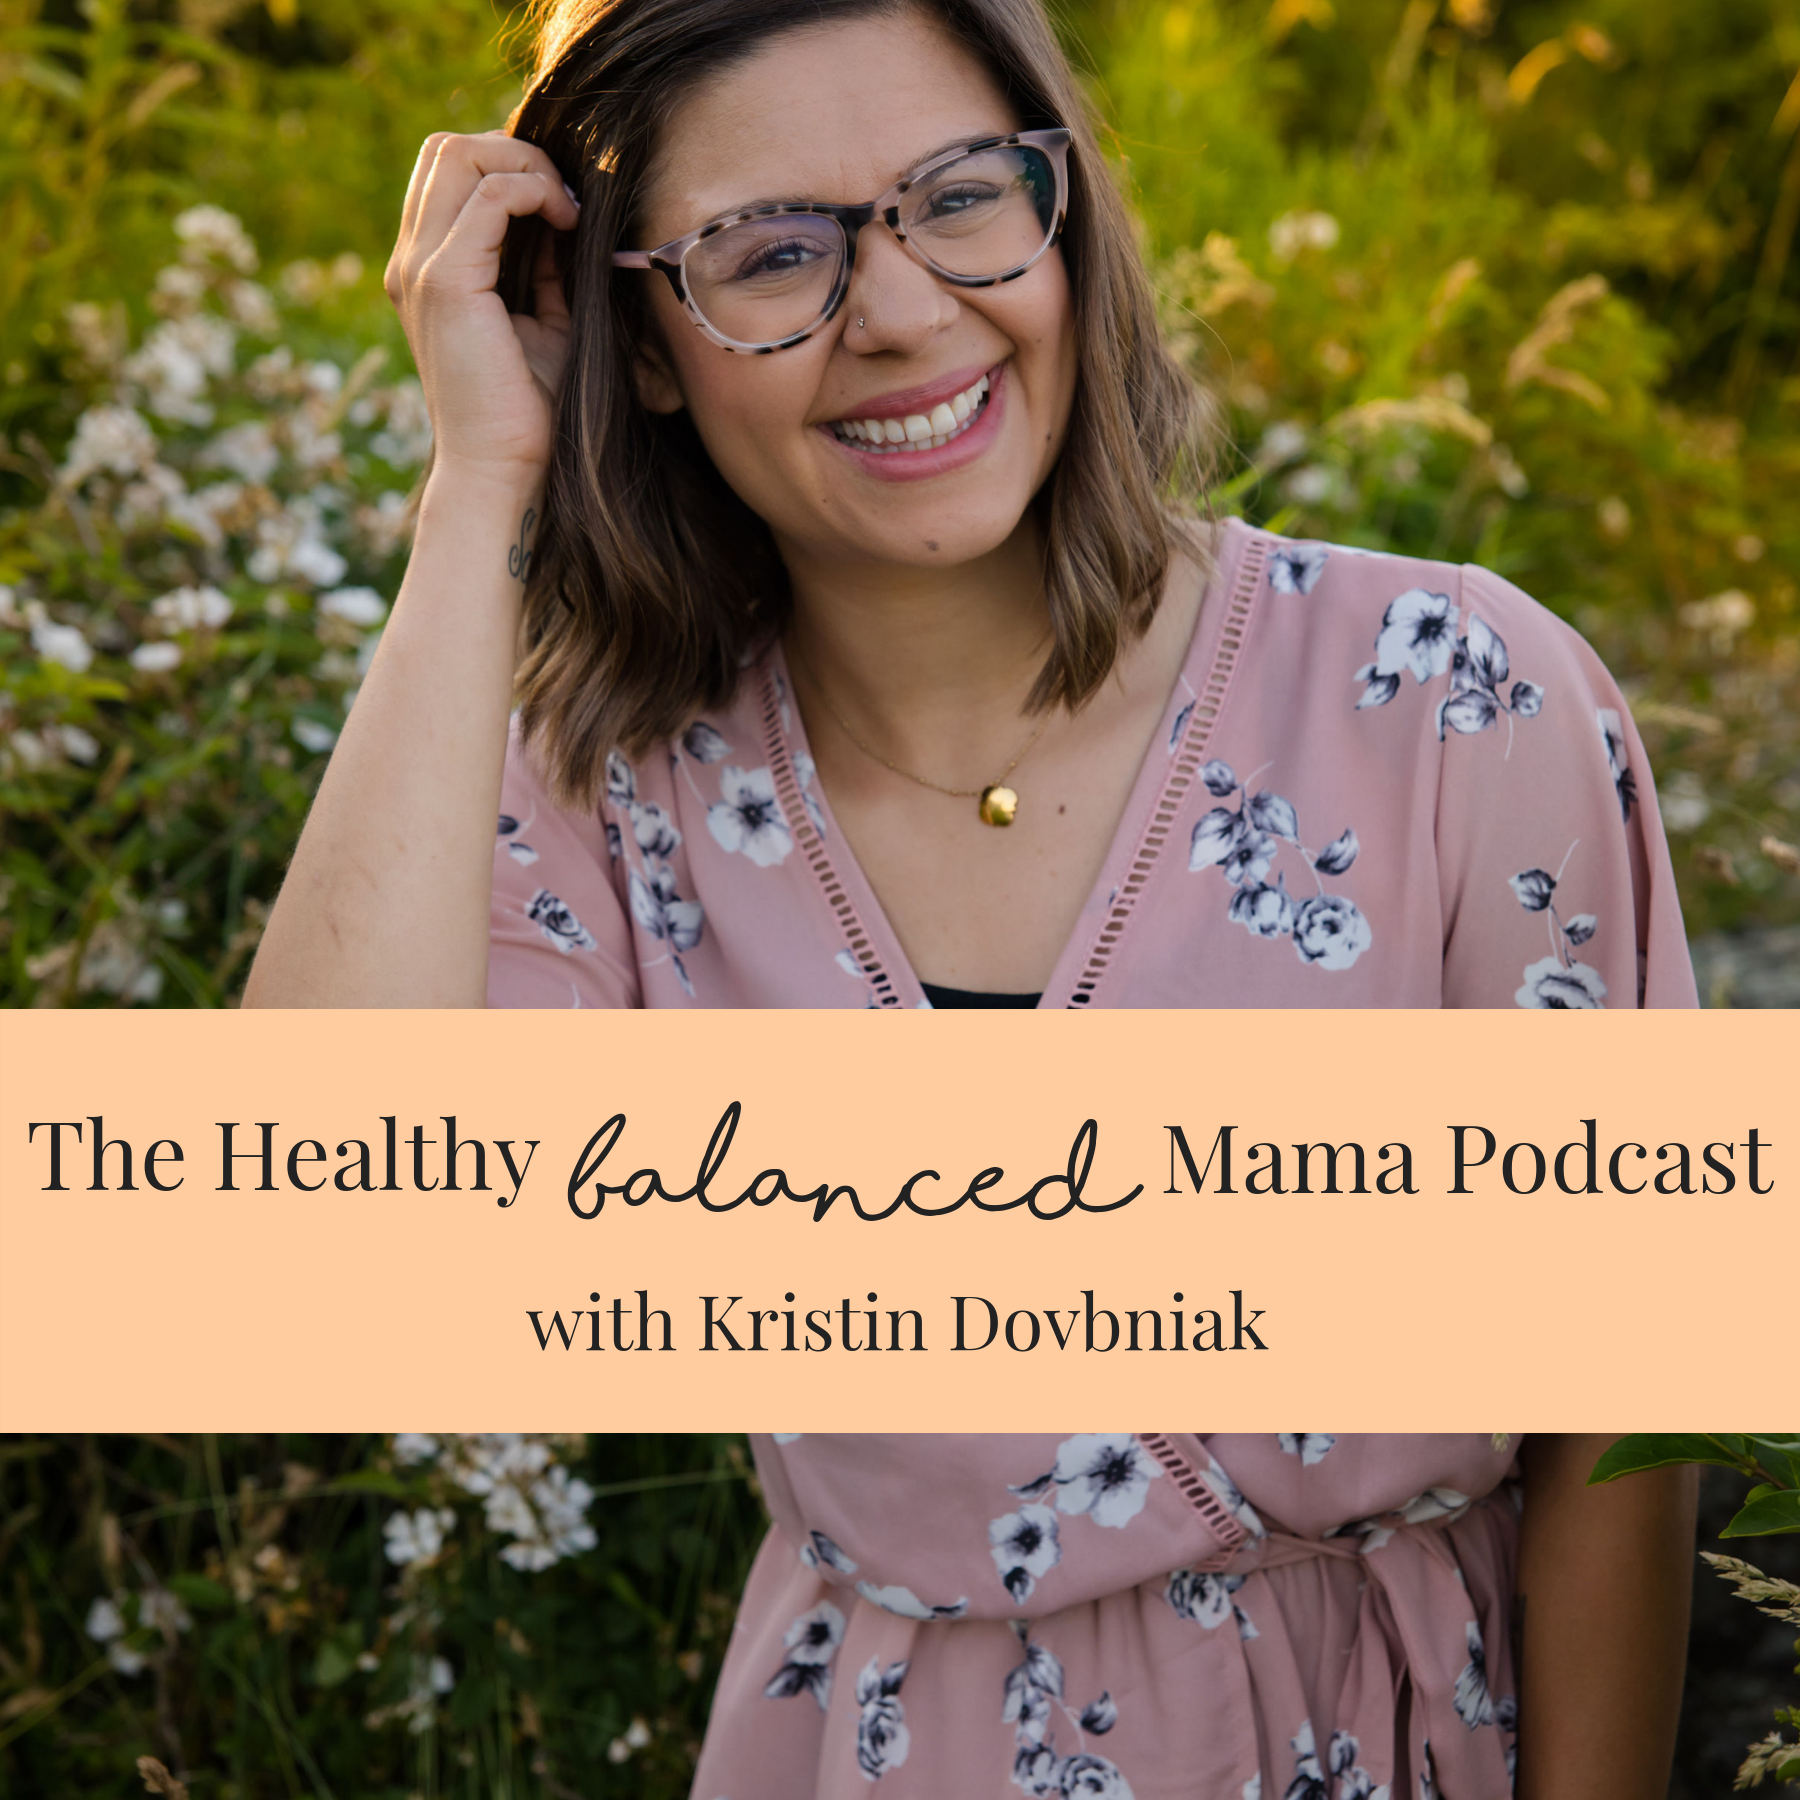 THE BEST HEALTH PODCASTS FOR CHRISTIAN WOMEN - INTUITIVE EATING SUPPORT The Healthy Balanced Mama Podcast